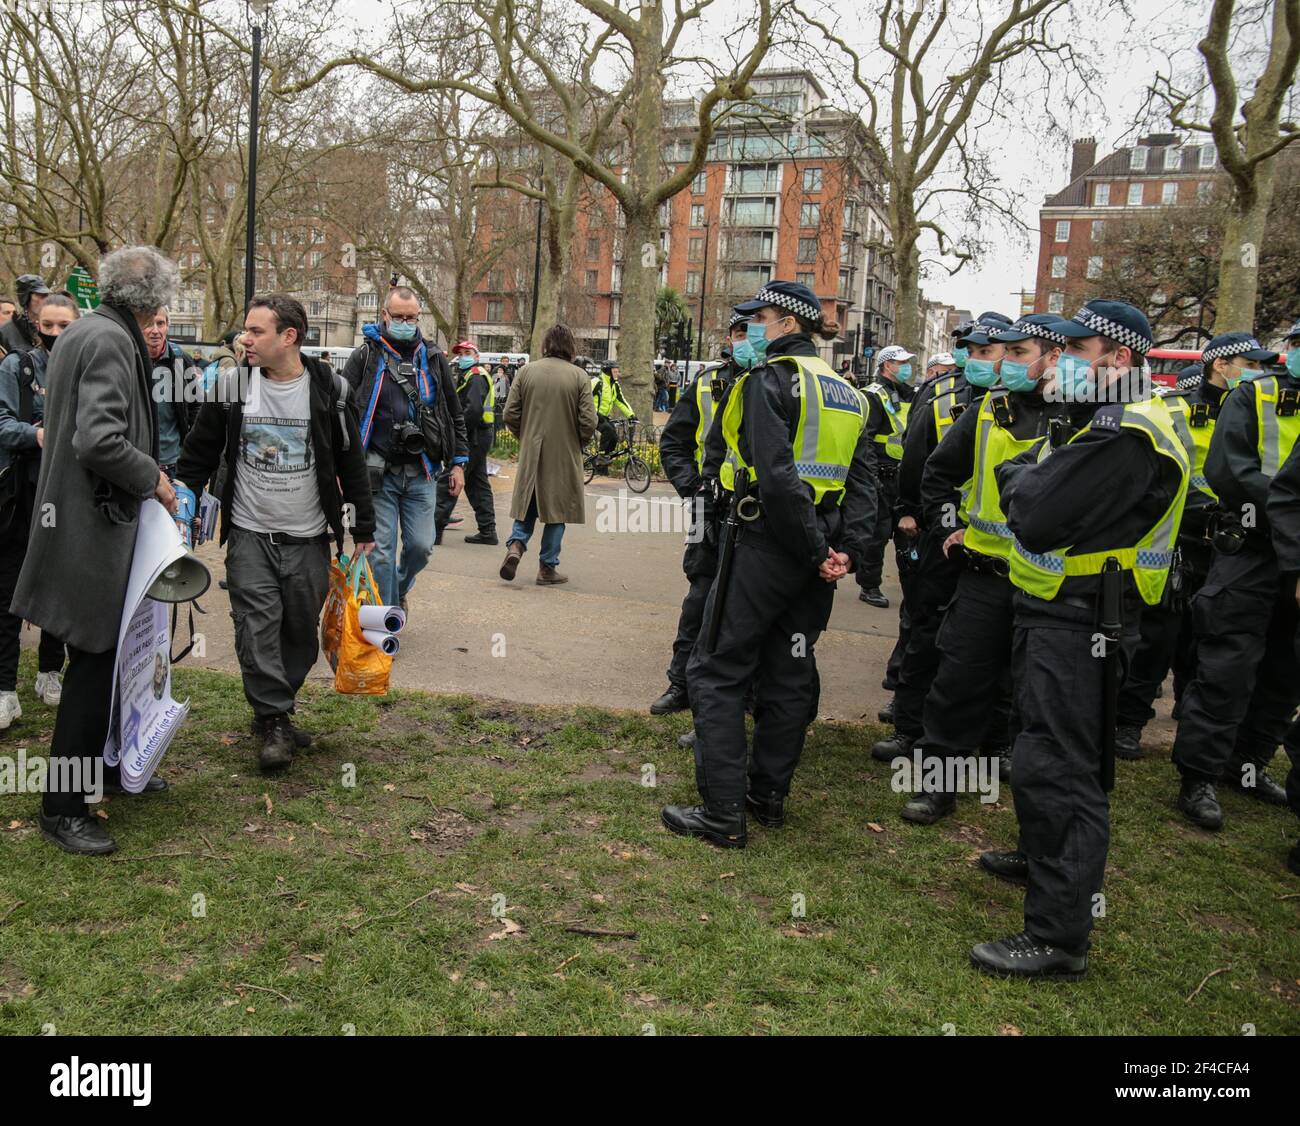 London UK 20 March 2021. Piers Corbyn English weather forecaster, businessman, activist, anti-vaxxer and conspiracy theorist arrives in Hyde Park to take part in todays anti lockdown ,anti vaccine and anti new laws to curb demonstrations ,currently been debated in parliament , walkinf=g by as police looks on . Paul Quezada-Neiman/Alamy Live News Stock Photo